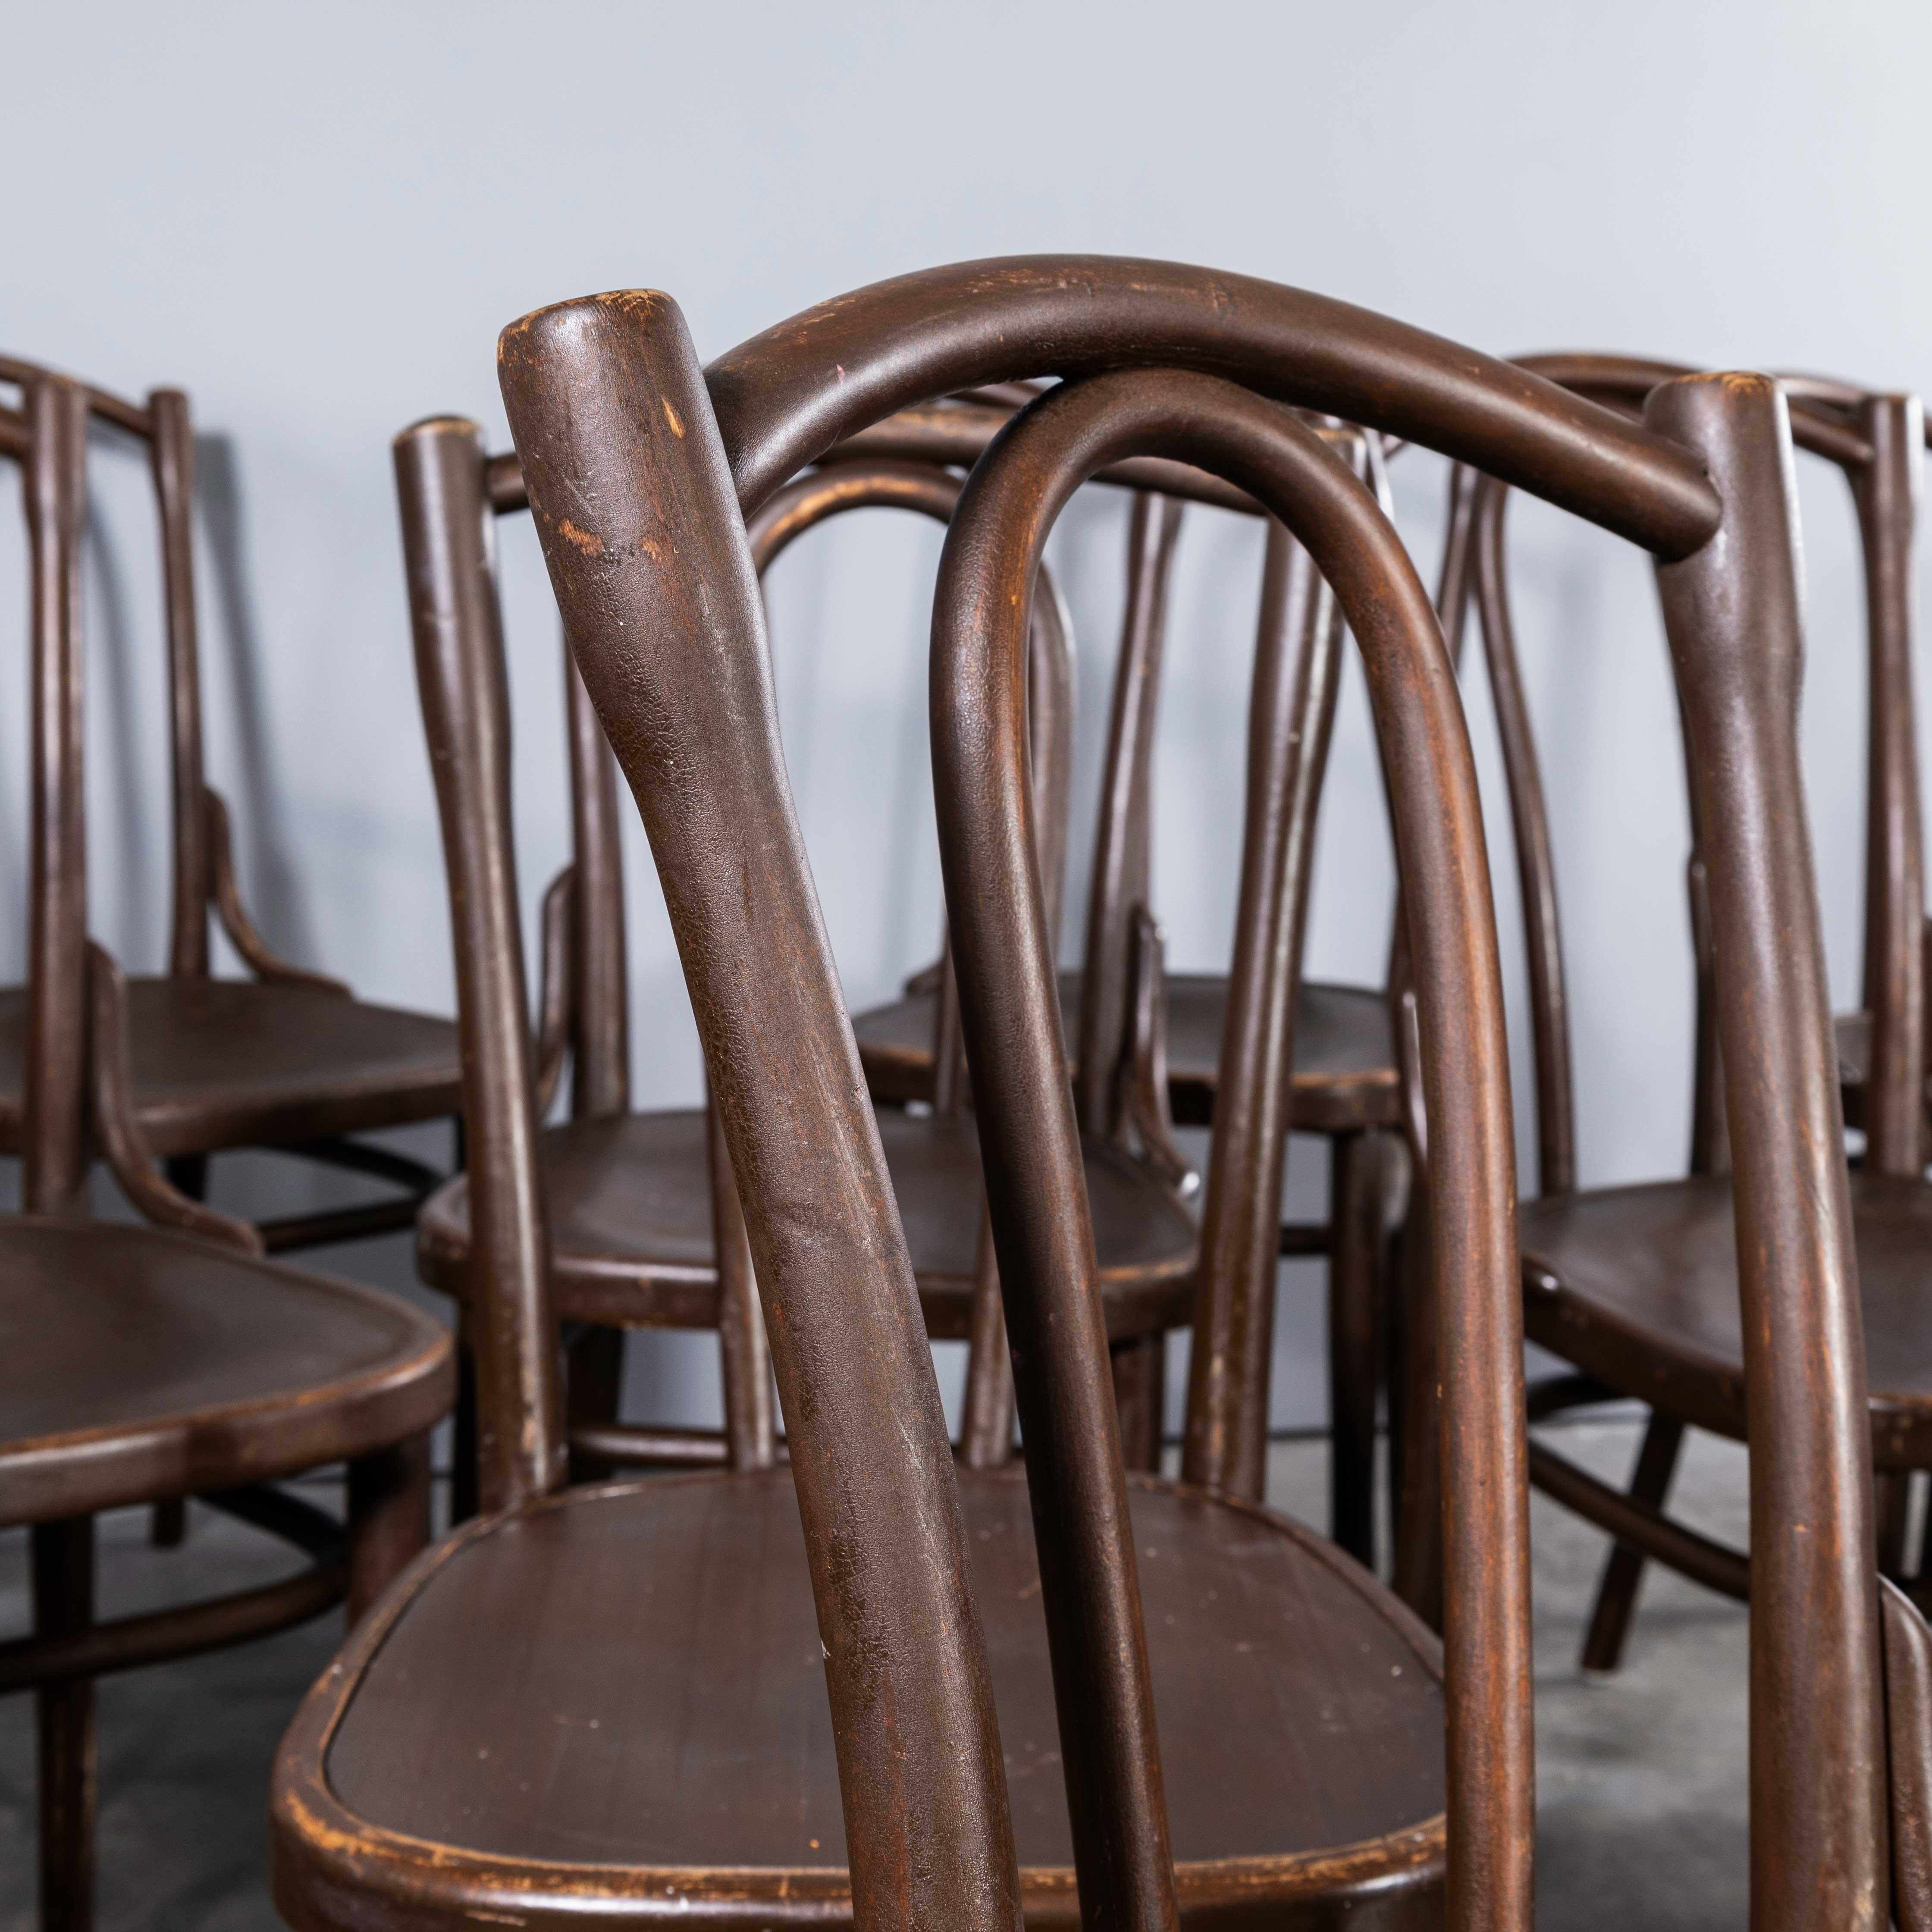 1940’s Thonet Original Single Hoop Bentwood Chairs – Set Of Seventeen
1940’s Thonet Original Single Hoop Bentwood Chairs – Set Of Seventeen. Founded in the early 19th Century by Michael Thonet, Thonet invented the process of steam bending wood under